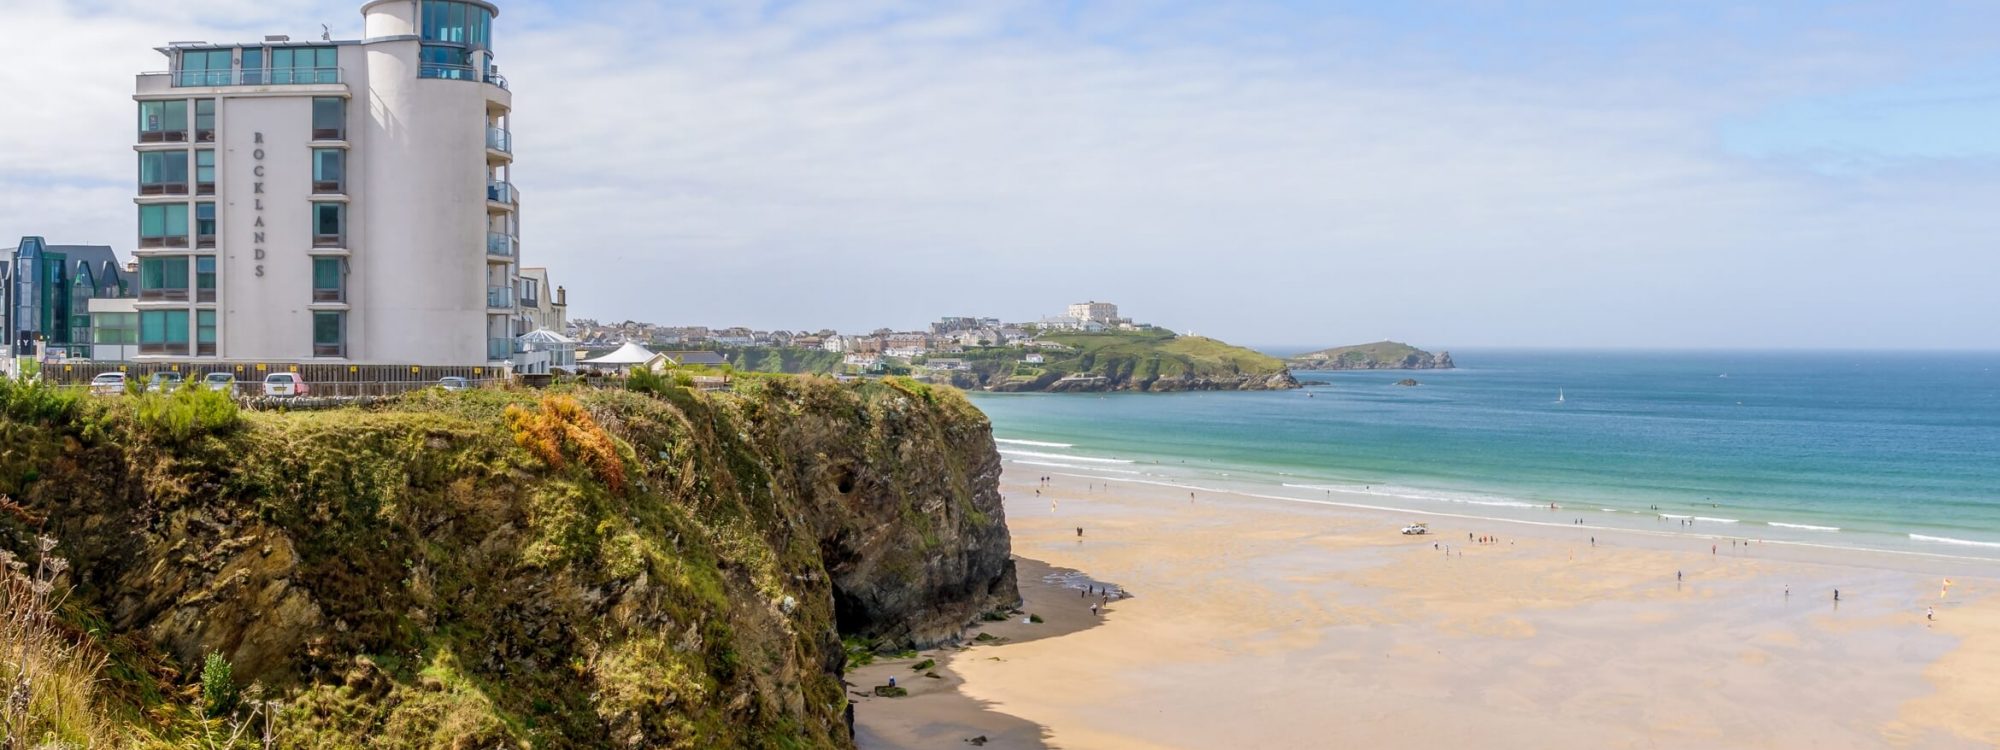 1 Rocklands Newquay Tolcarne Beach 2000x750 - Welcome to Rocklands Newquay